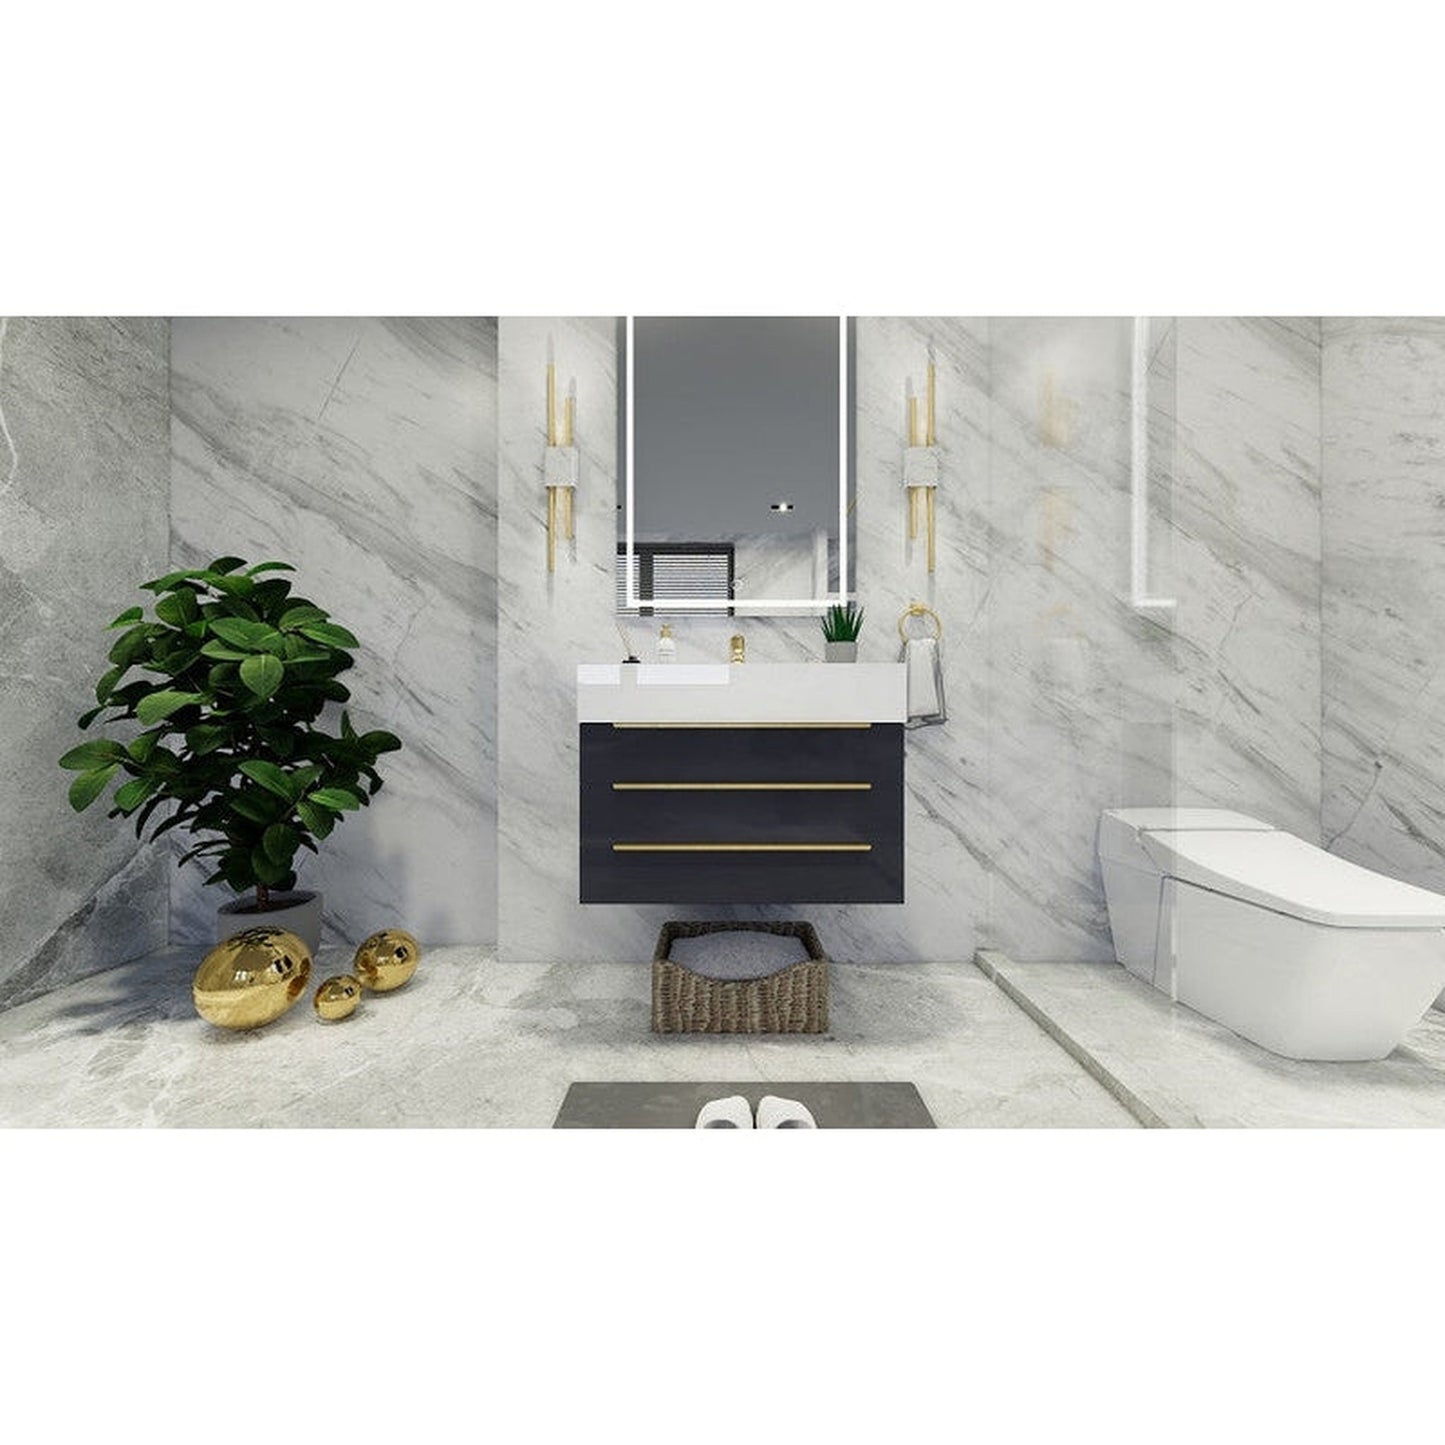 Moreno Bath Bethany 30" High Gloss Gray Wall-Mounted Vanity With Single Reinforced White Acrylic Sink